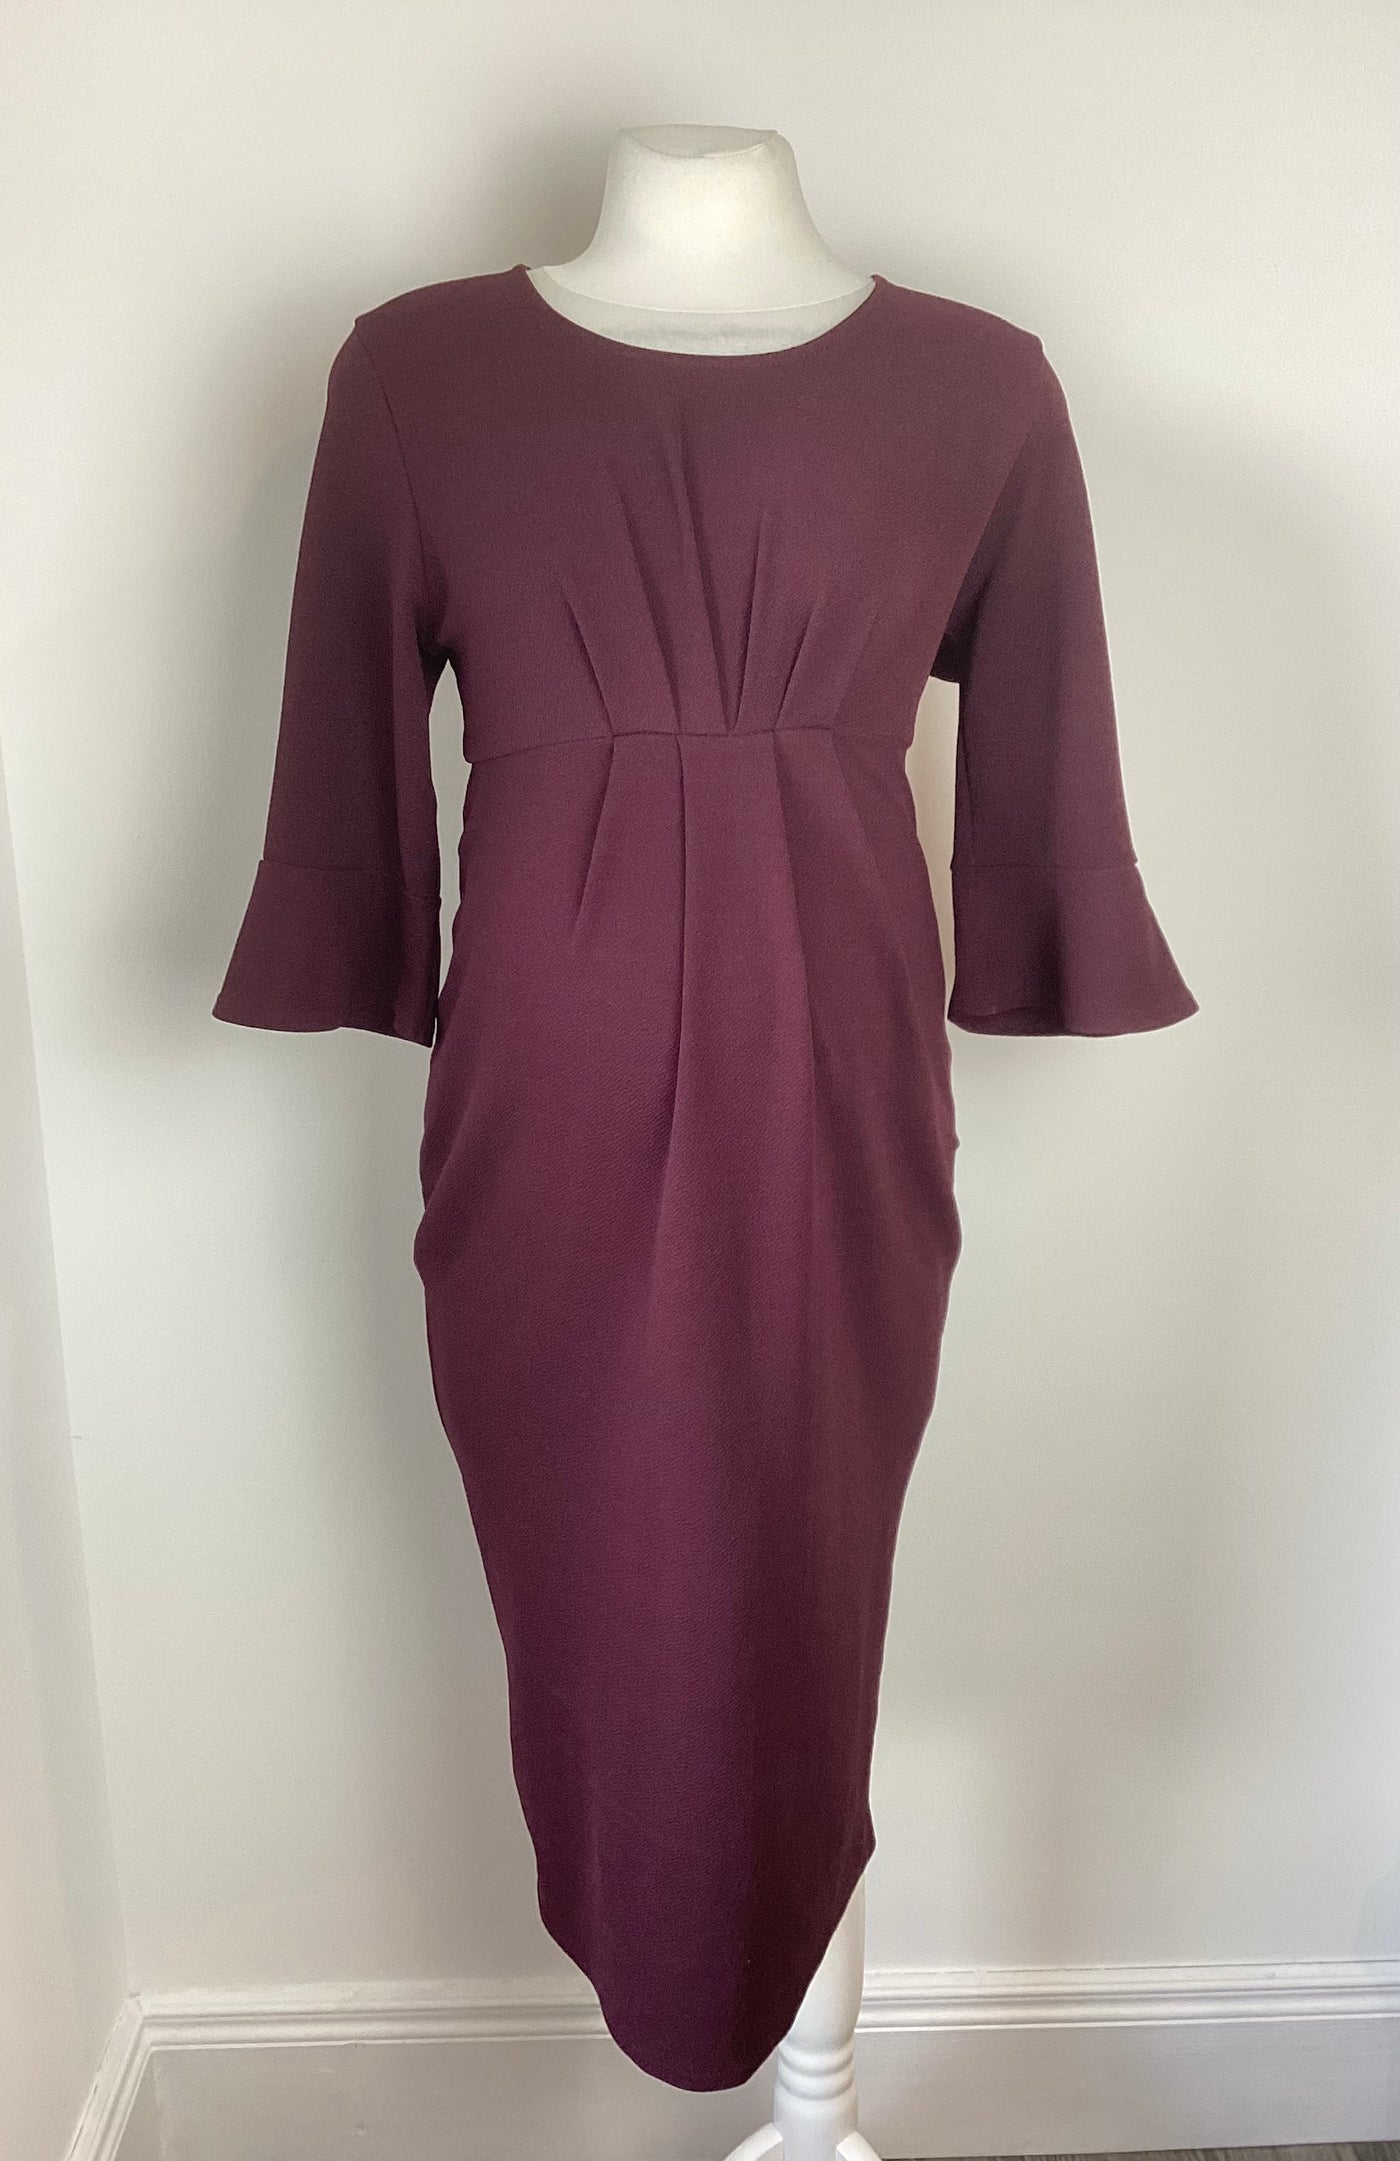 New Look Maternity maroon dress with 3/4 sleeves - Size 14